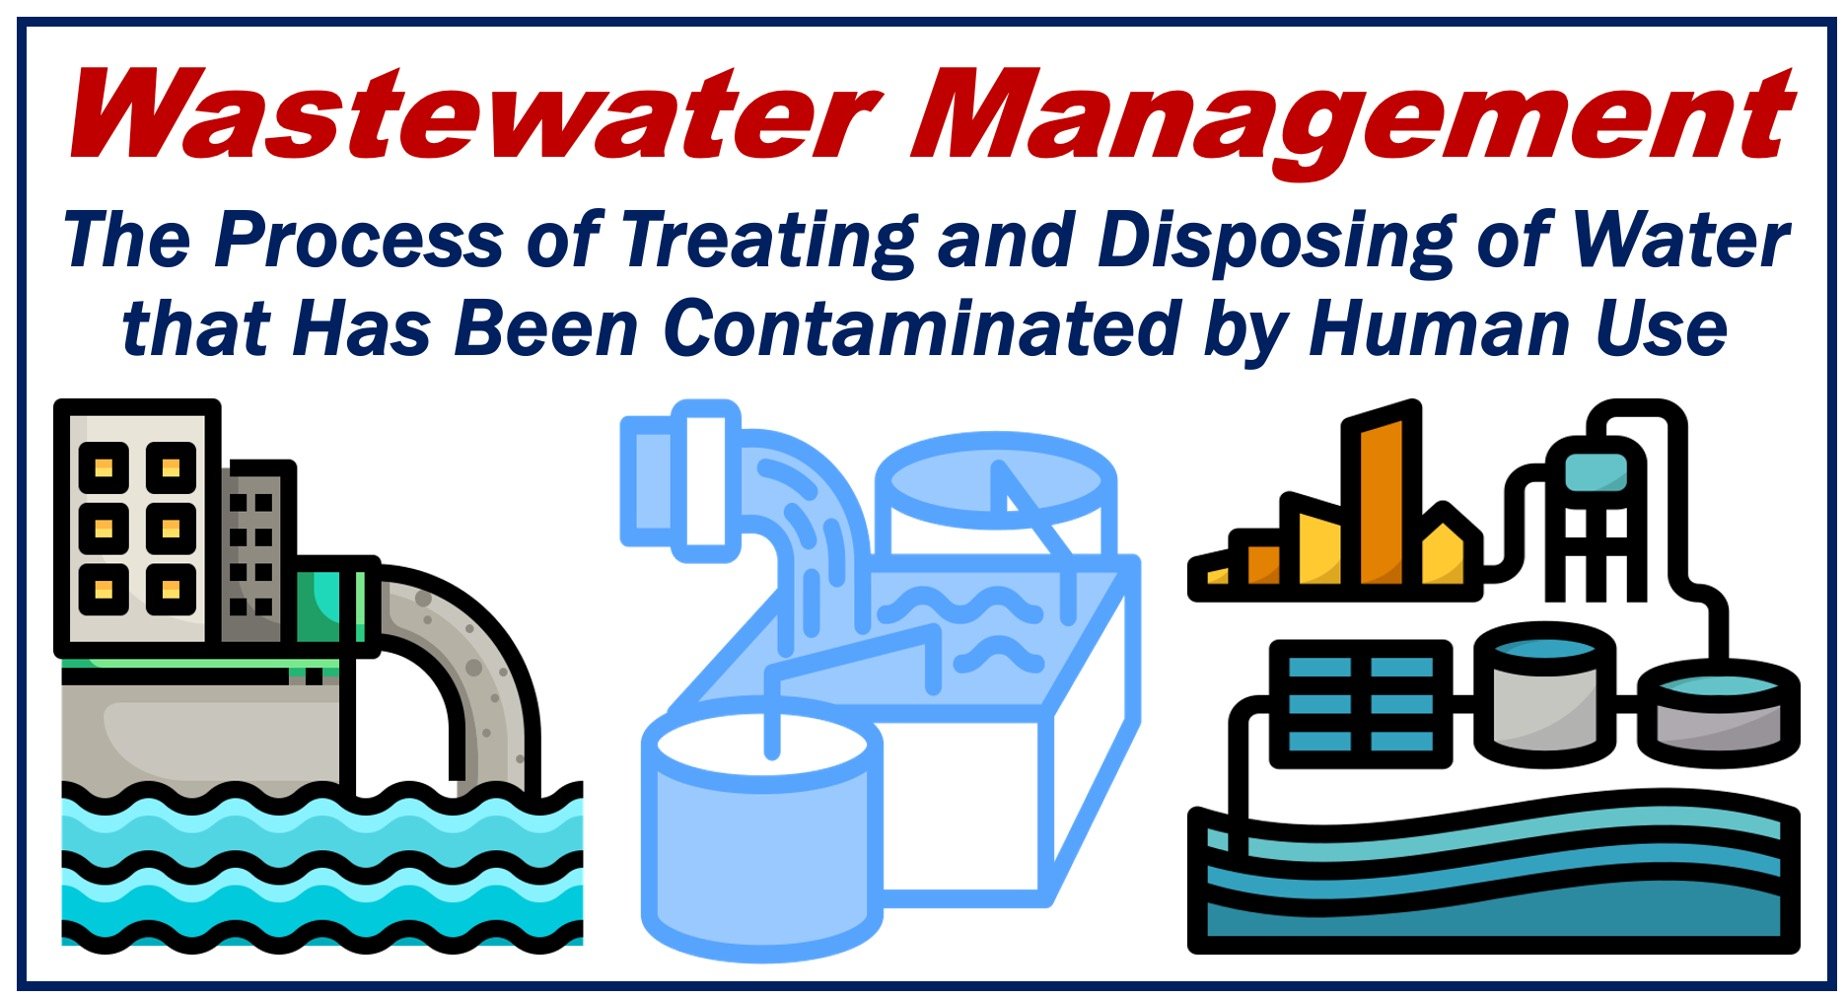 Drawings of water treatment centers plus wastewater management definition.